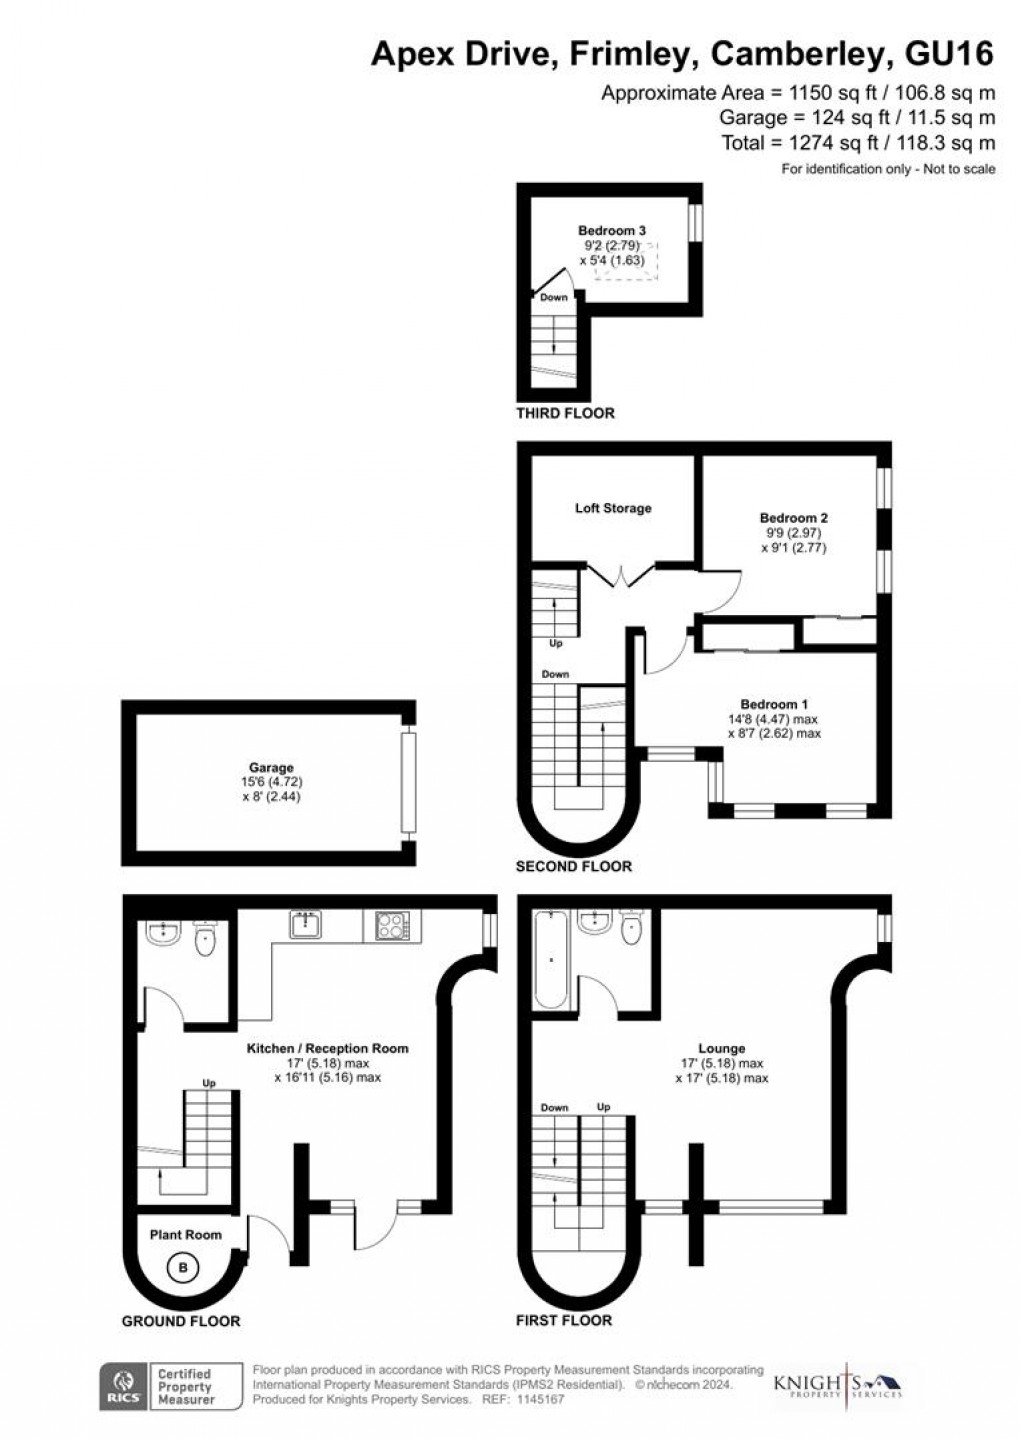 Floorplan for Apex Drive, Frimley, Camberley